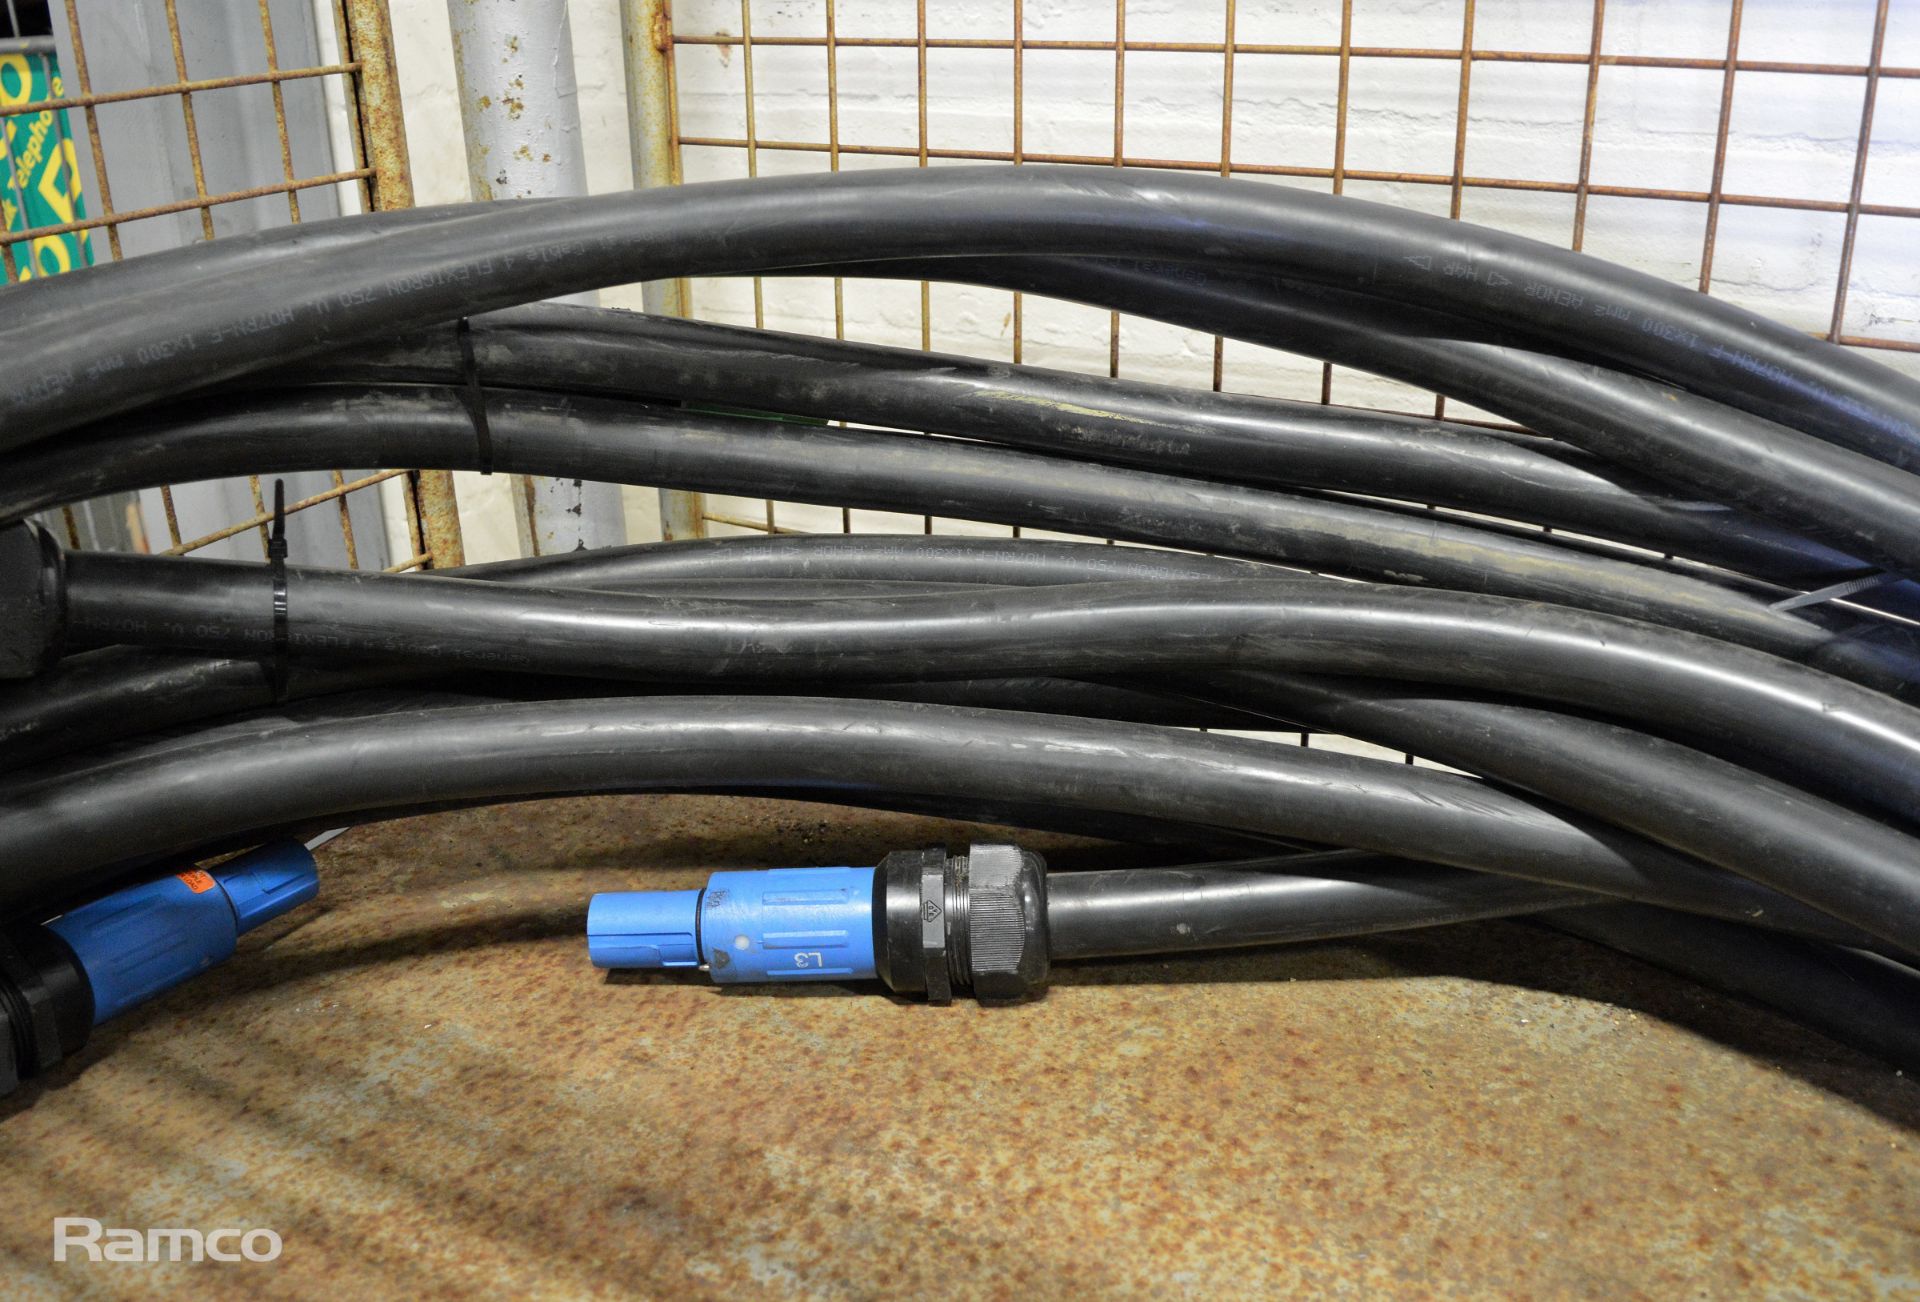 5x Heavy duty extension cable with M/F coupling 600vac 660amp - Image 2 of 3